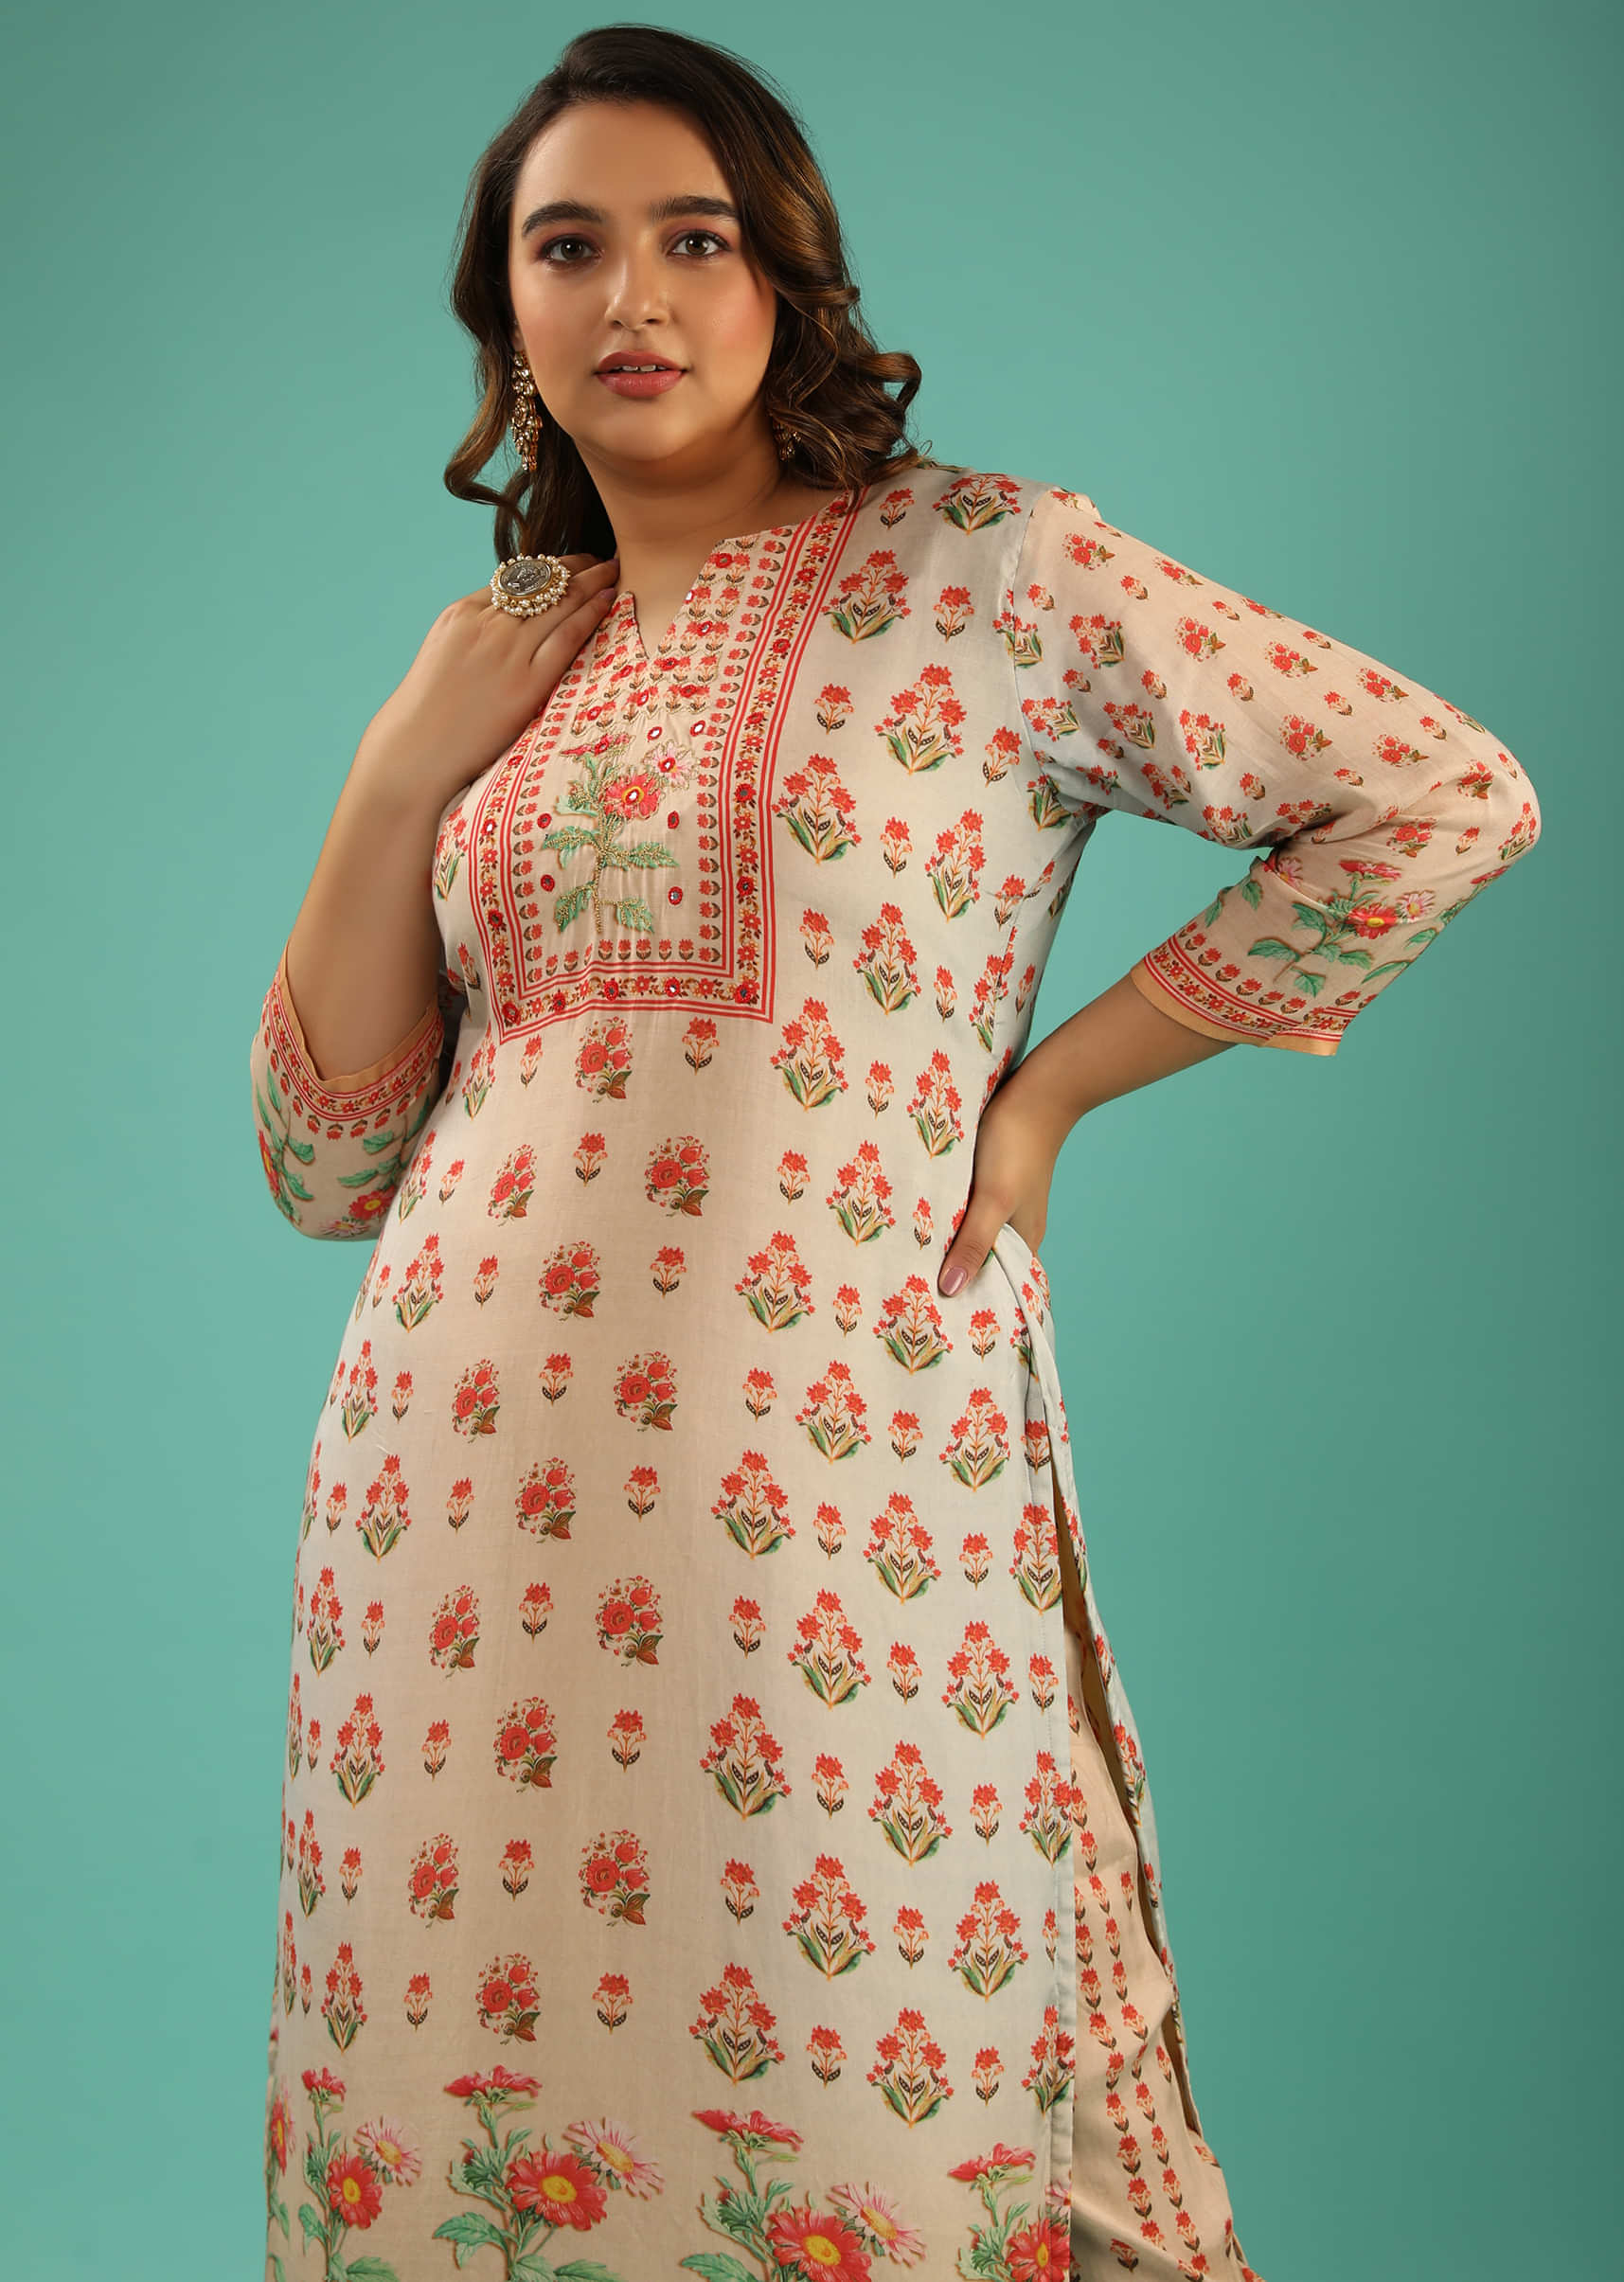 Peach And Grey Shaded Straight Cut Palazzo Suit In Cotton With Abla Work And Floral Printed Buttis